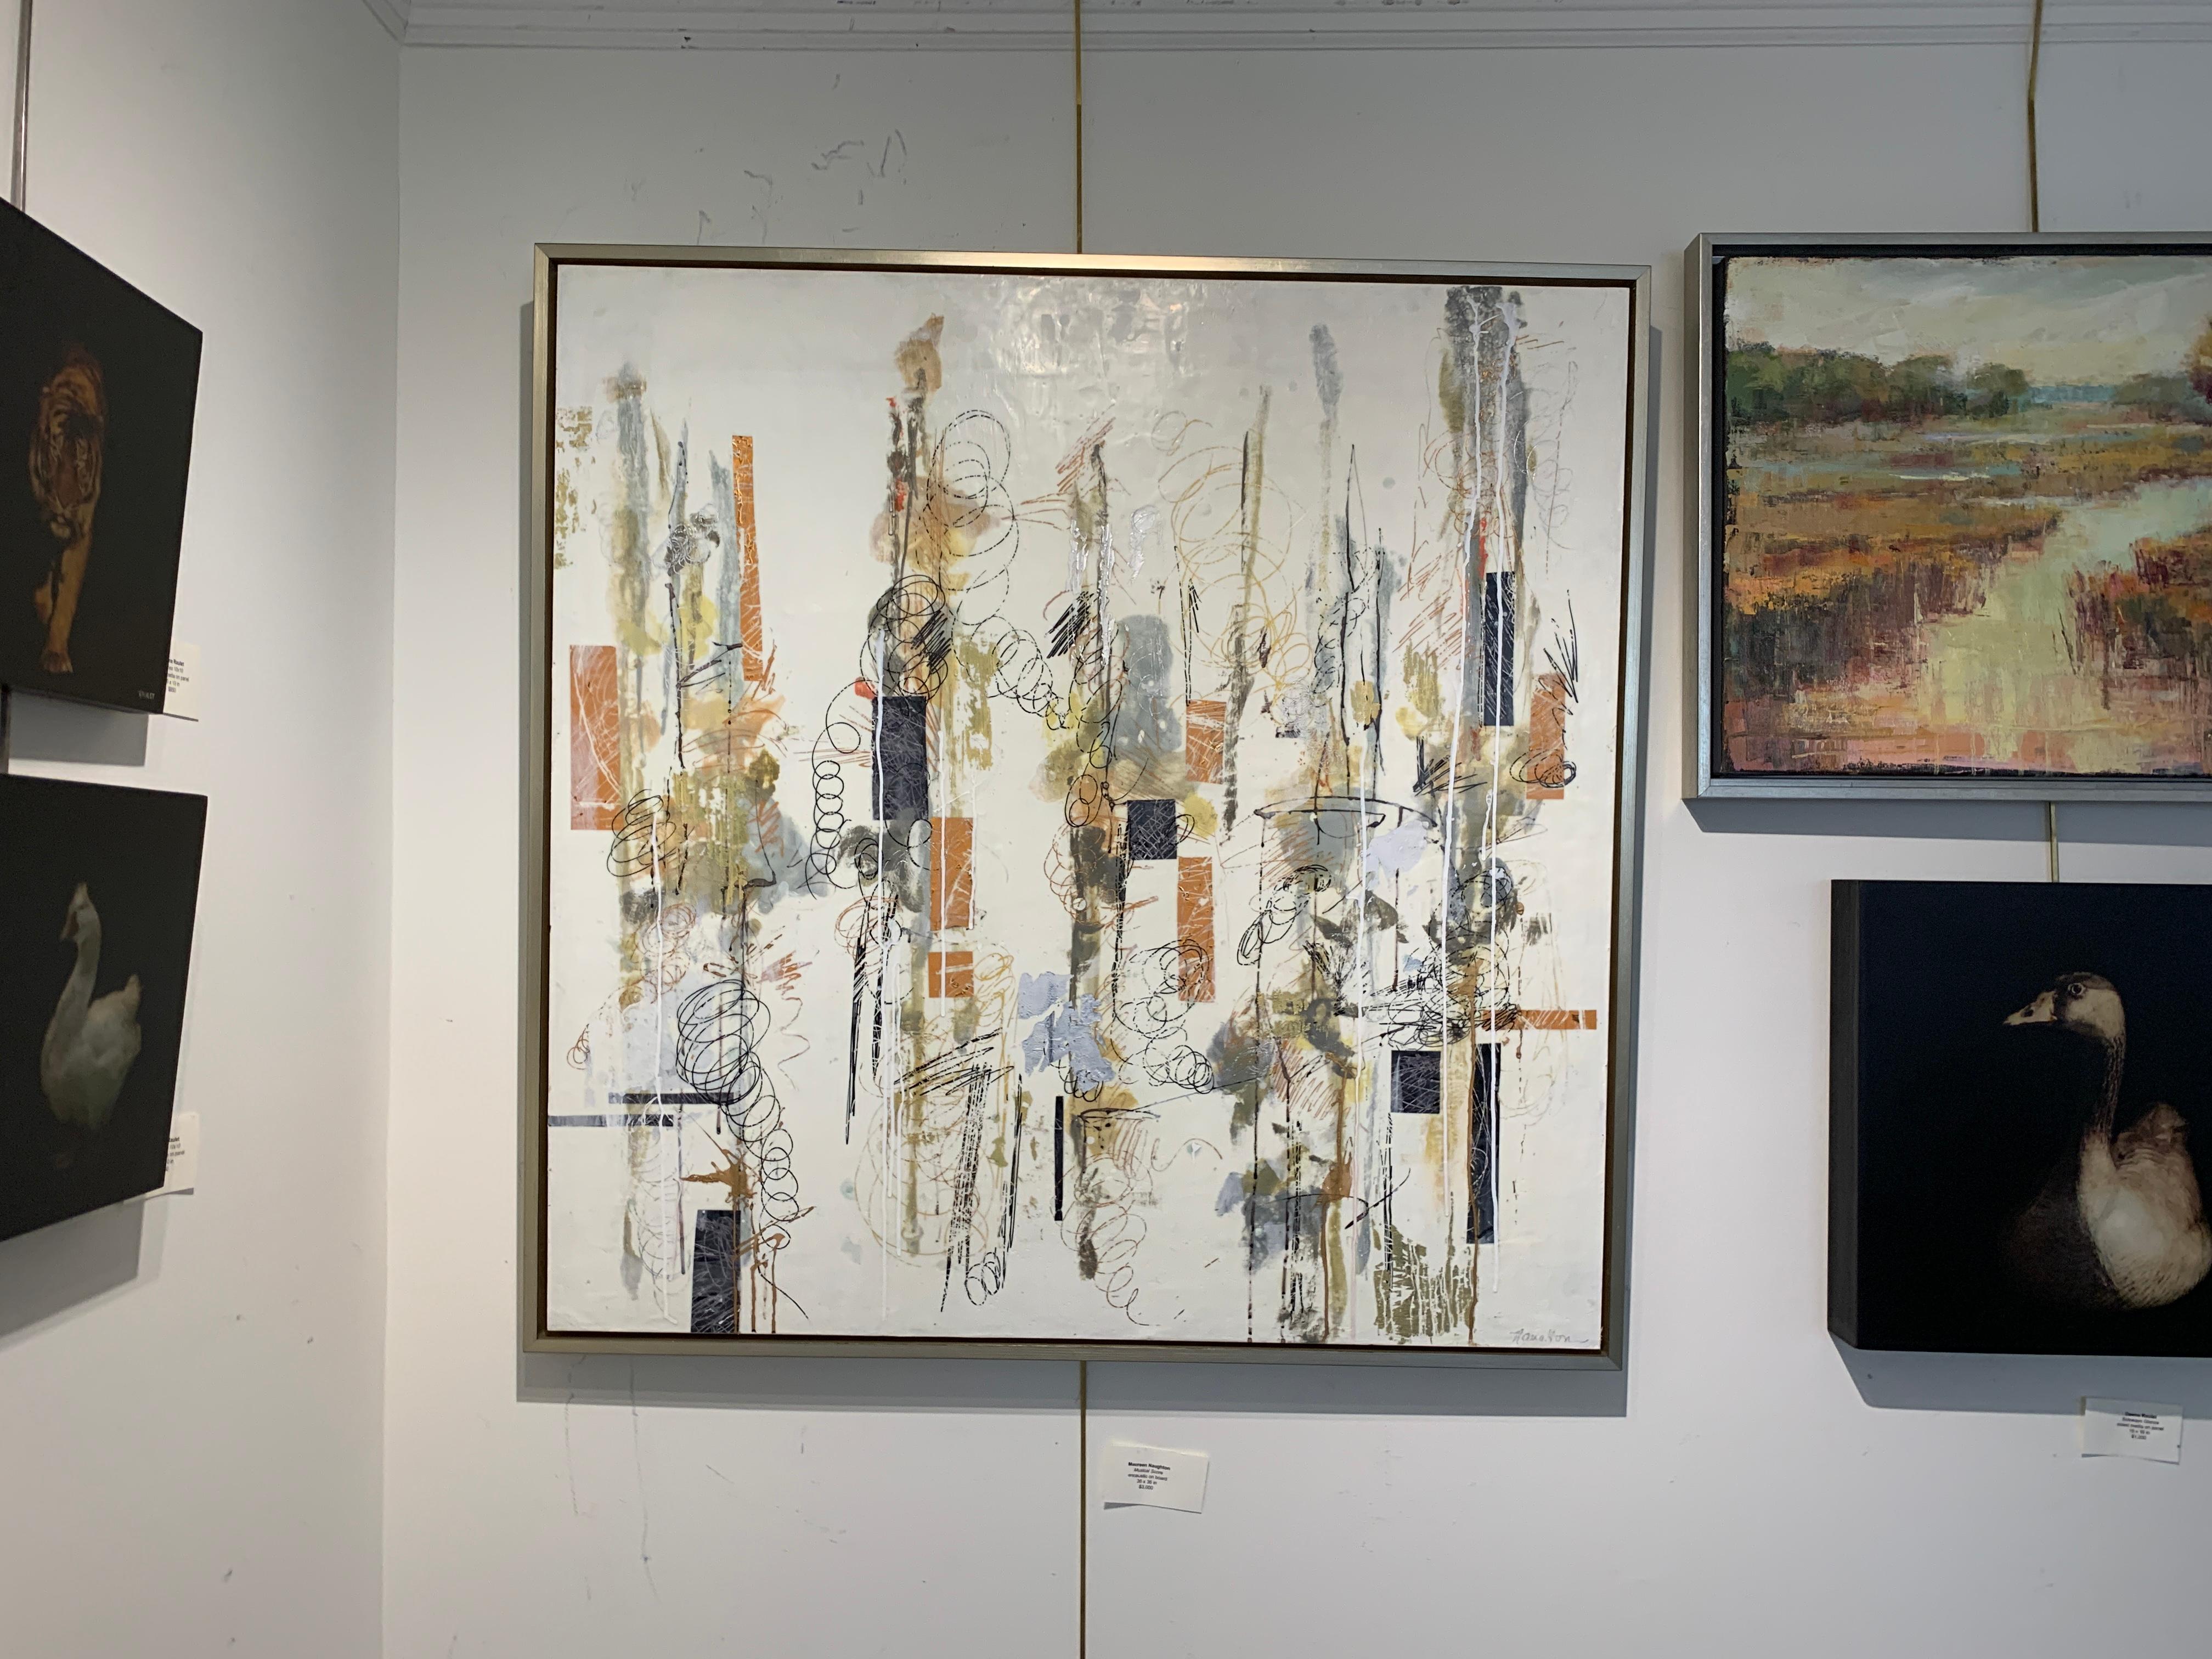 'Musical Score' is a large abstract encaustic on board painting created by American artist Maureen Naughton in 2020. Featuring a striking arrangement of shapes and gestural marks of various sizes highlighted by a lovely accentuation of neutral